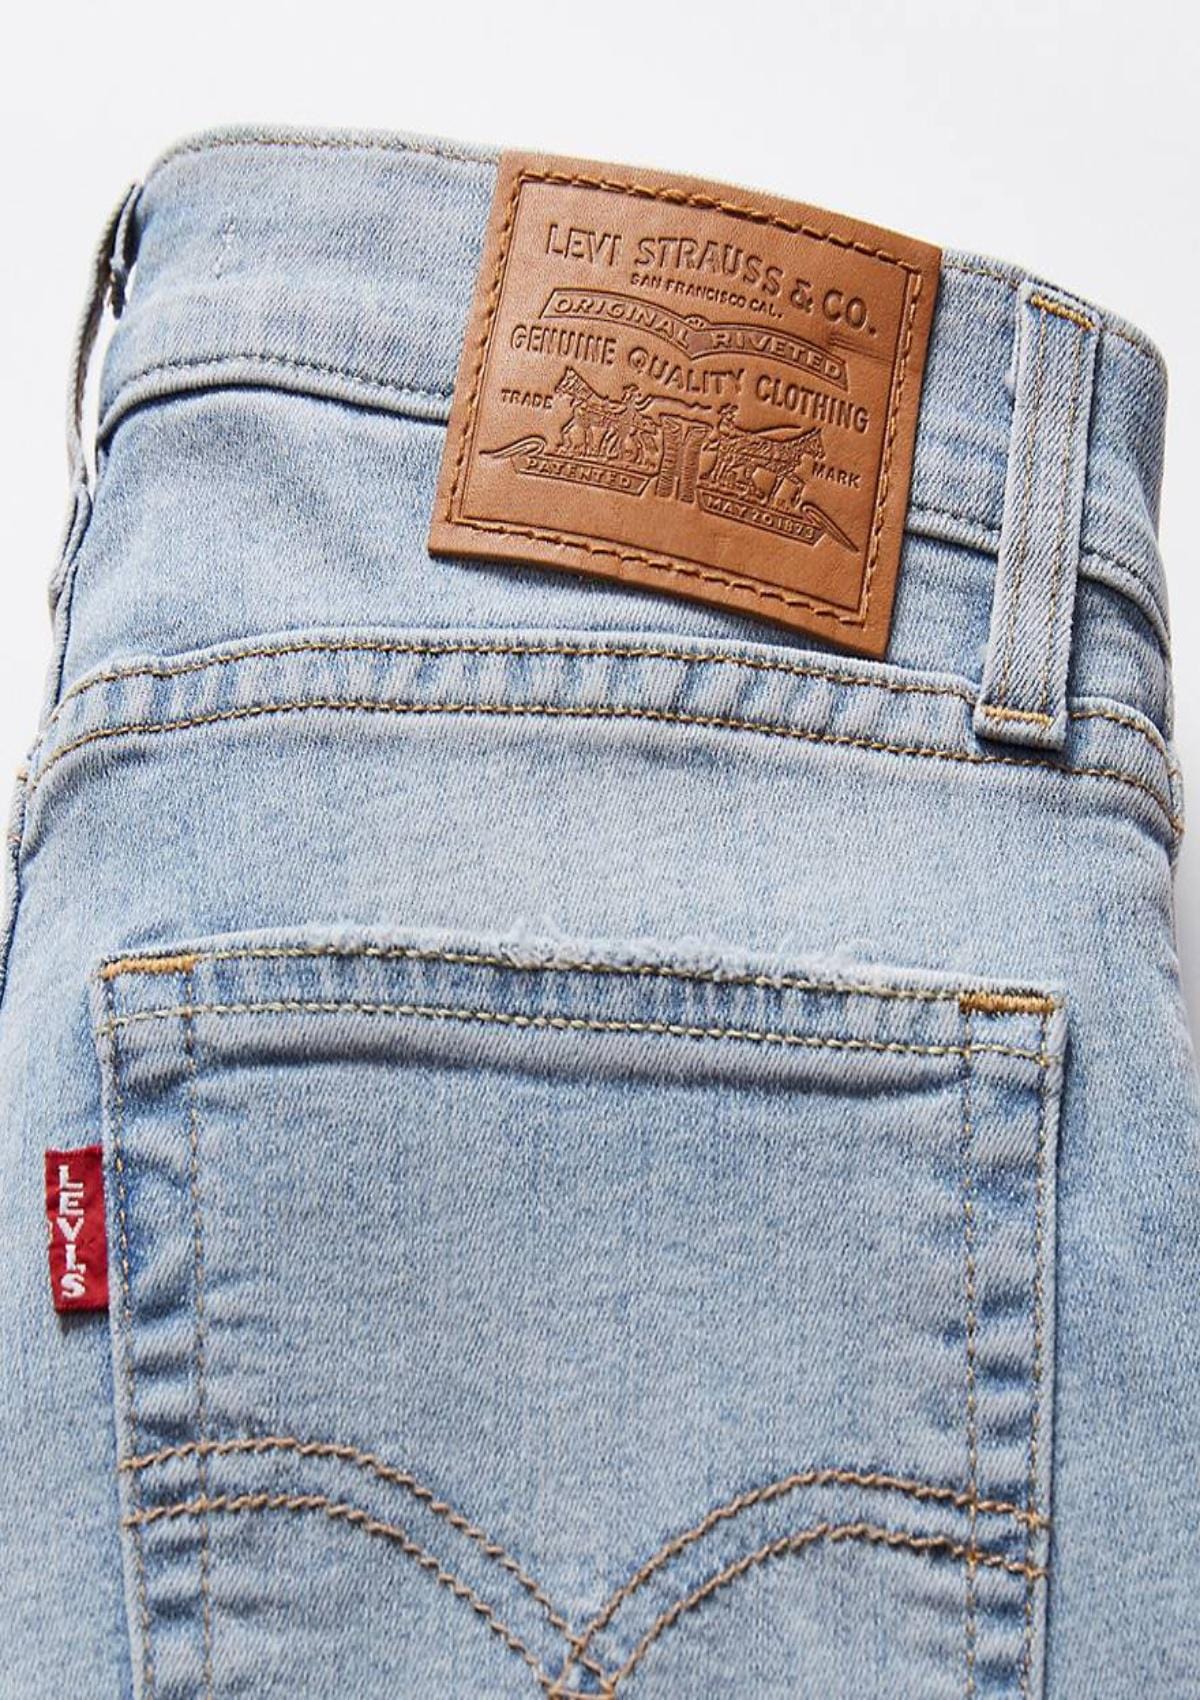 Levi Strauss Jeans 1888302700 70 | 724™ High Rise Straight Lightweight Jeans